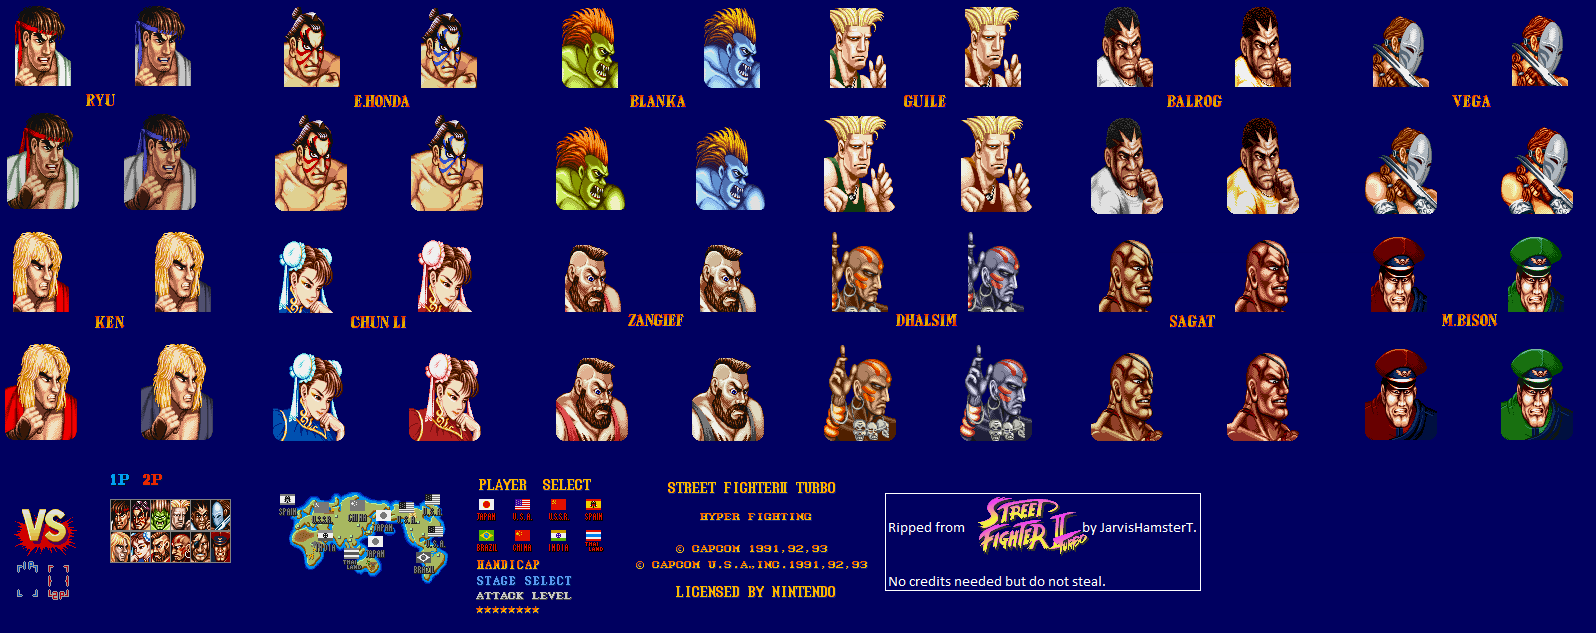 Street Fighter II: The World Warrior / Street Fighter II Turbo: Hyper Fighting - Player Select (Champion Edition)